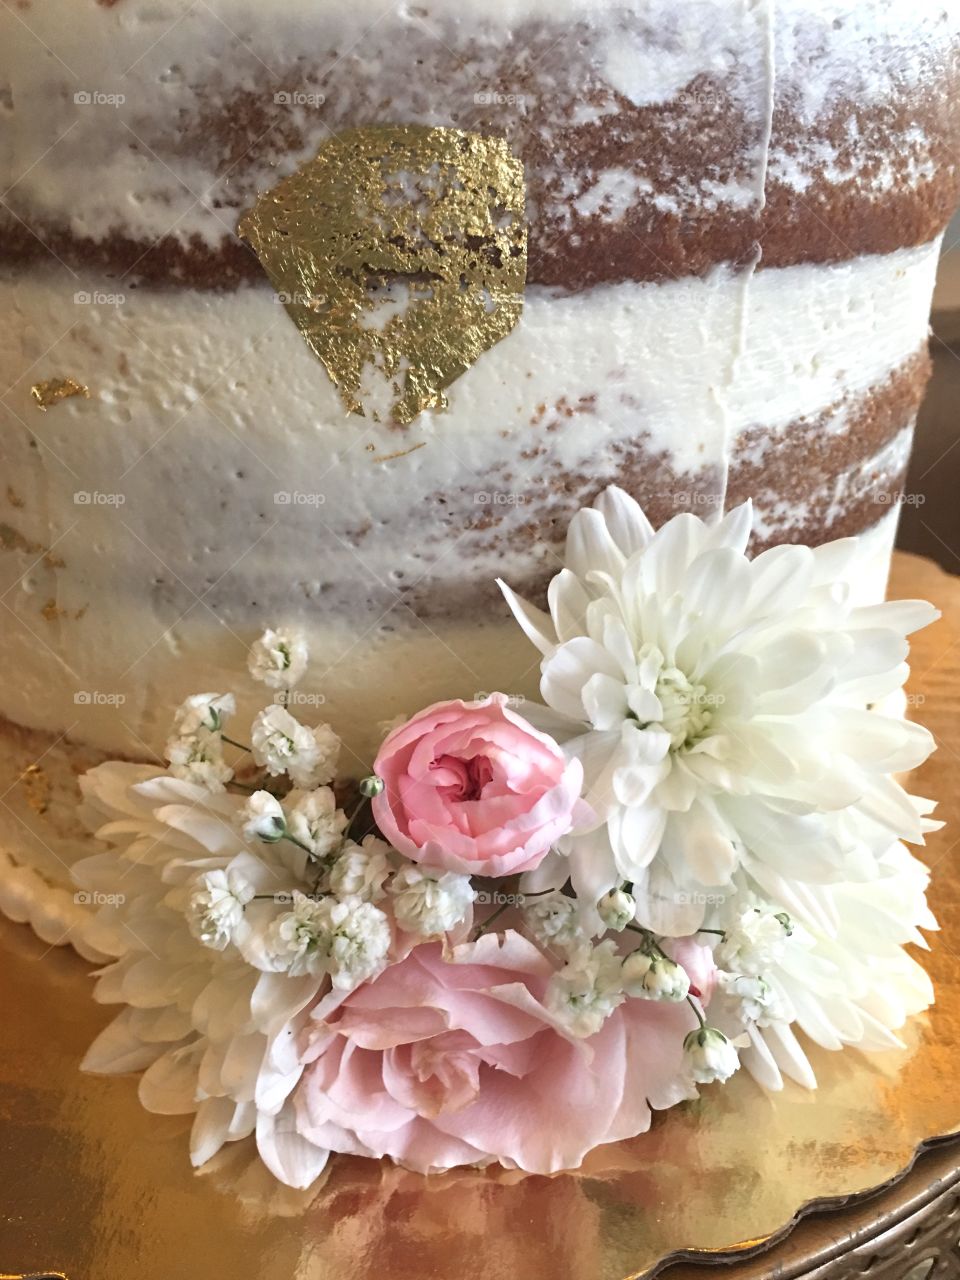  Baked cake decorated with real flowers and a thin layer of vanilla frosting